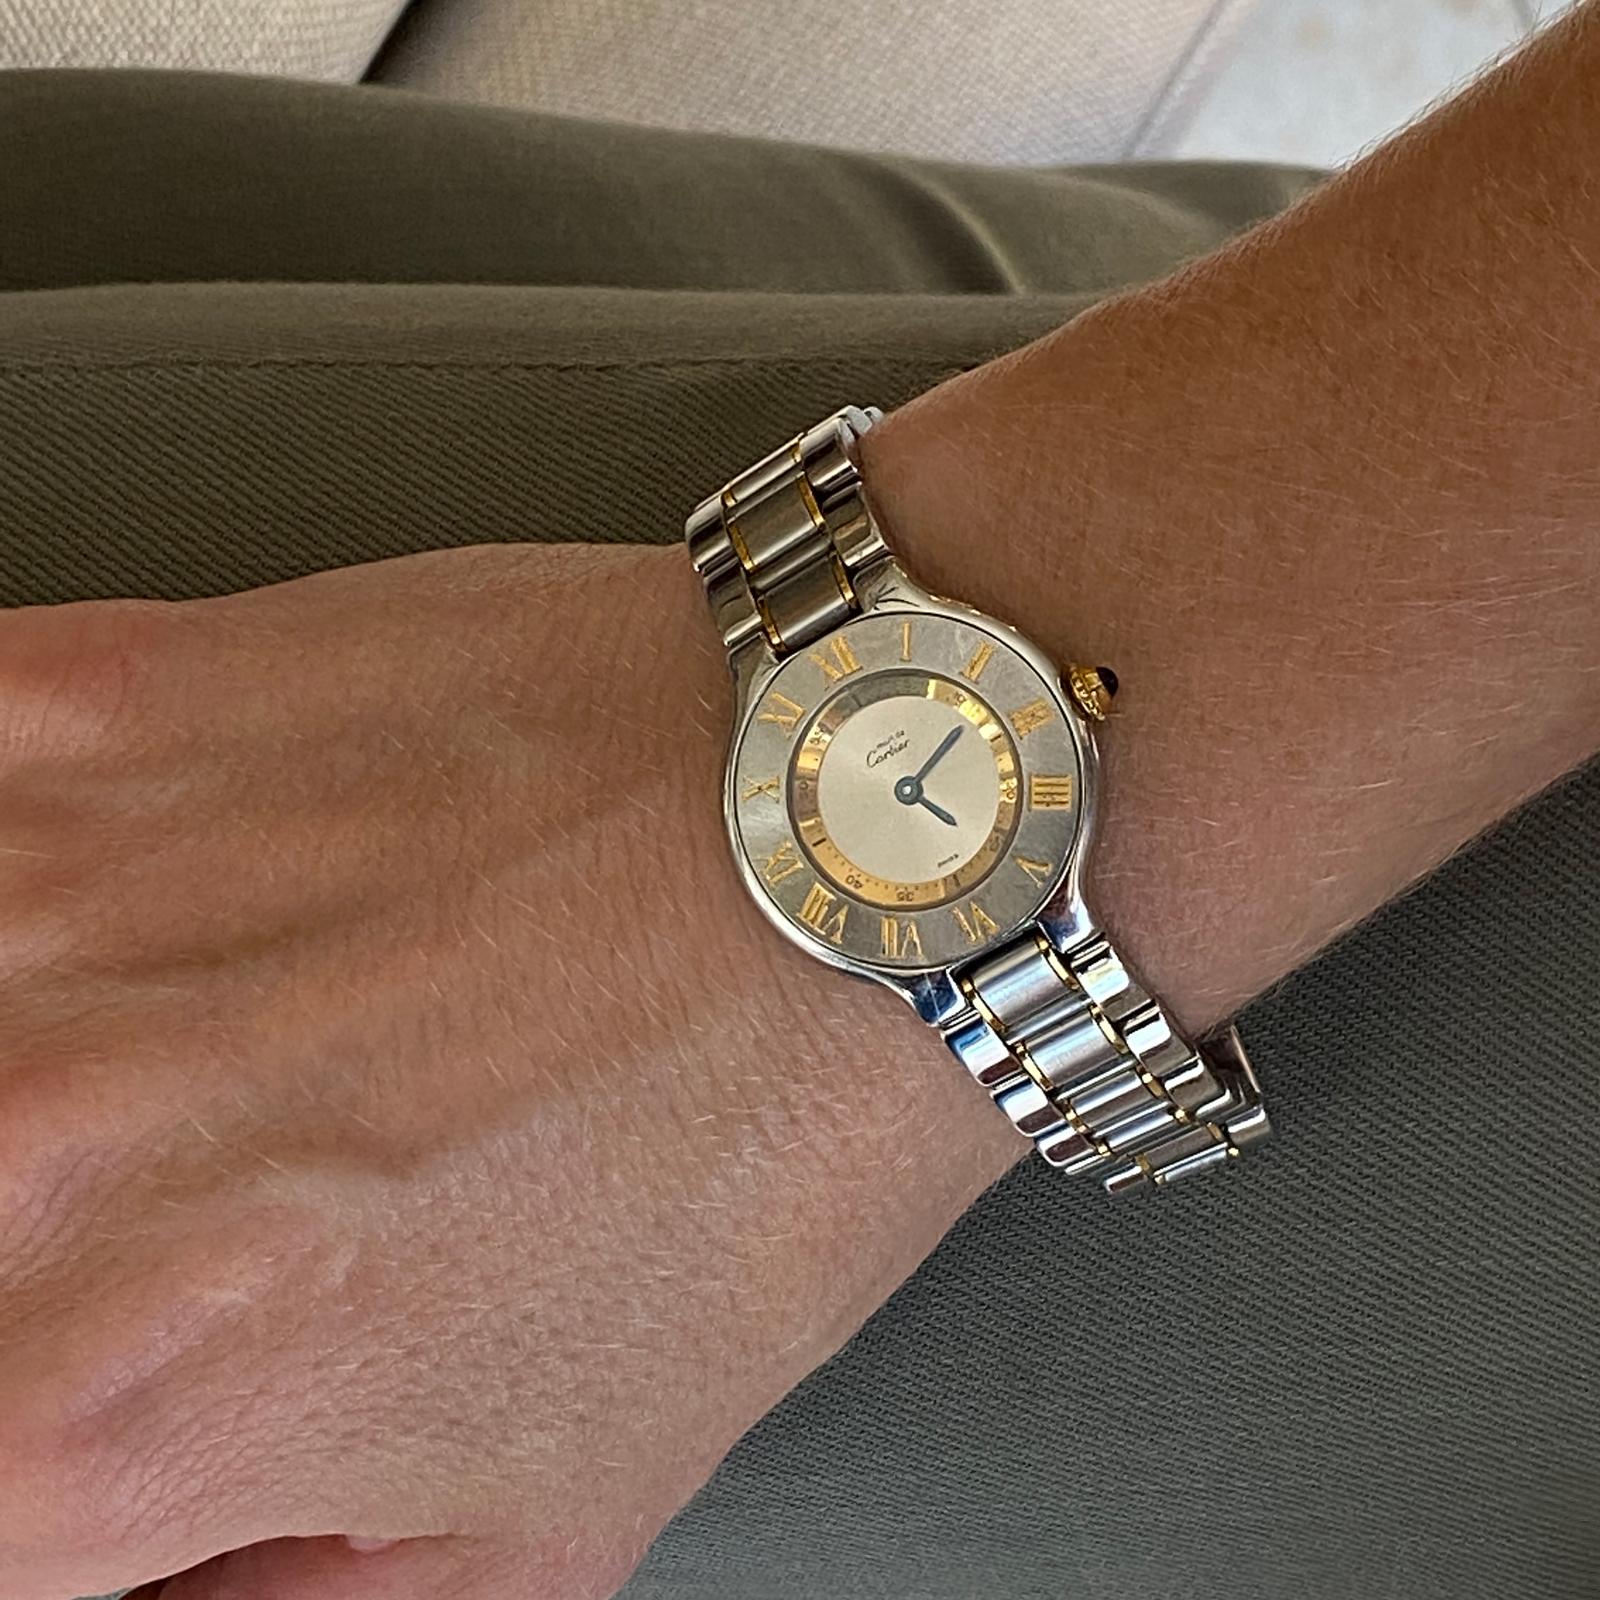 Cartier Must De 21 stainless steel and 18 karat yellow gold two tone watch. The watch measures 30mm from case to crown, is water resistant, and features a deployment buckle. Perfect working condition-new battery. 